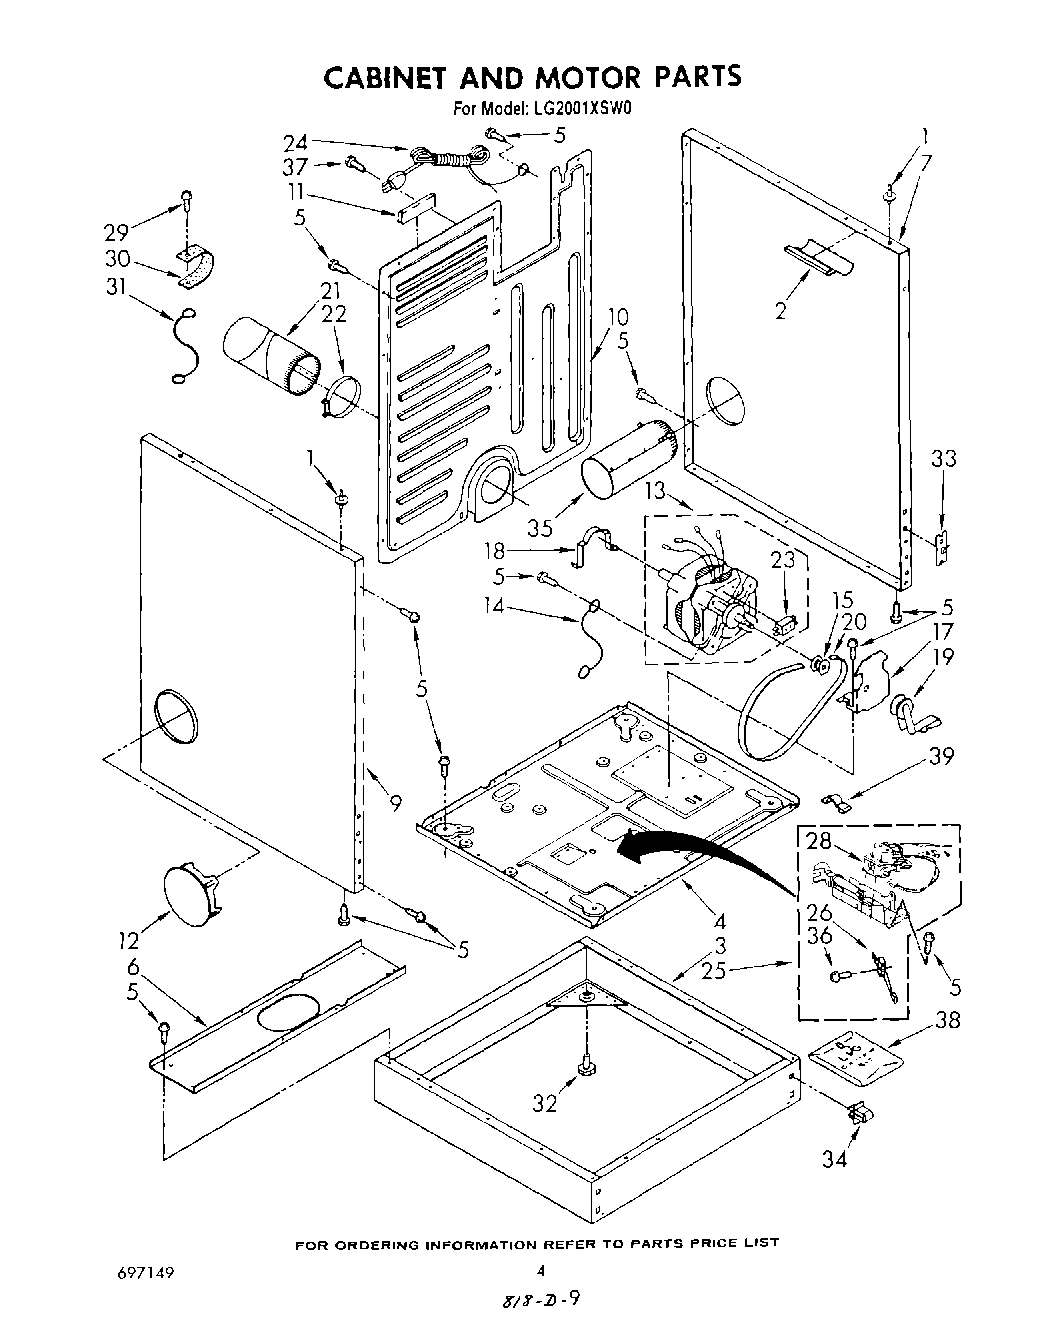 03 - CABINET AND MOTOR